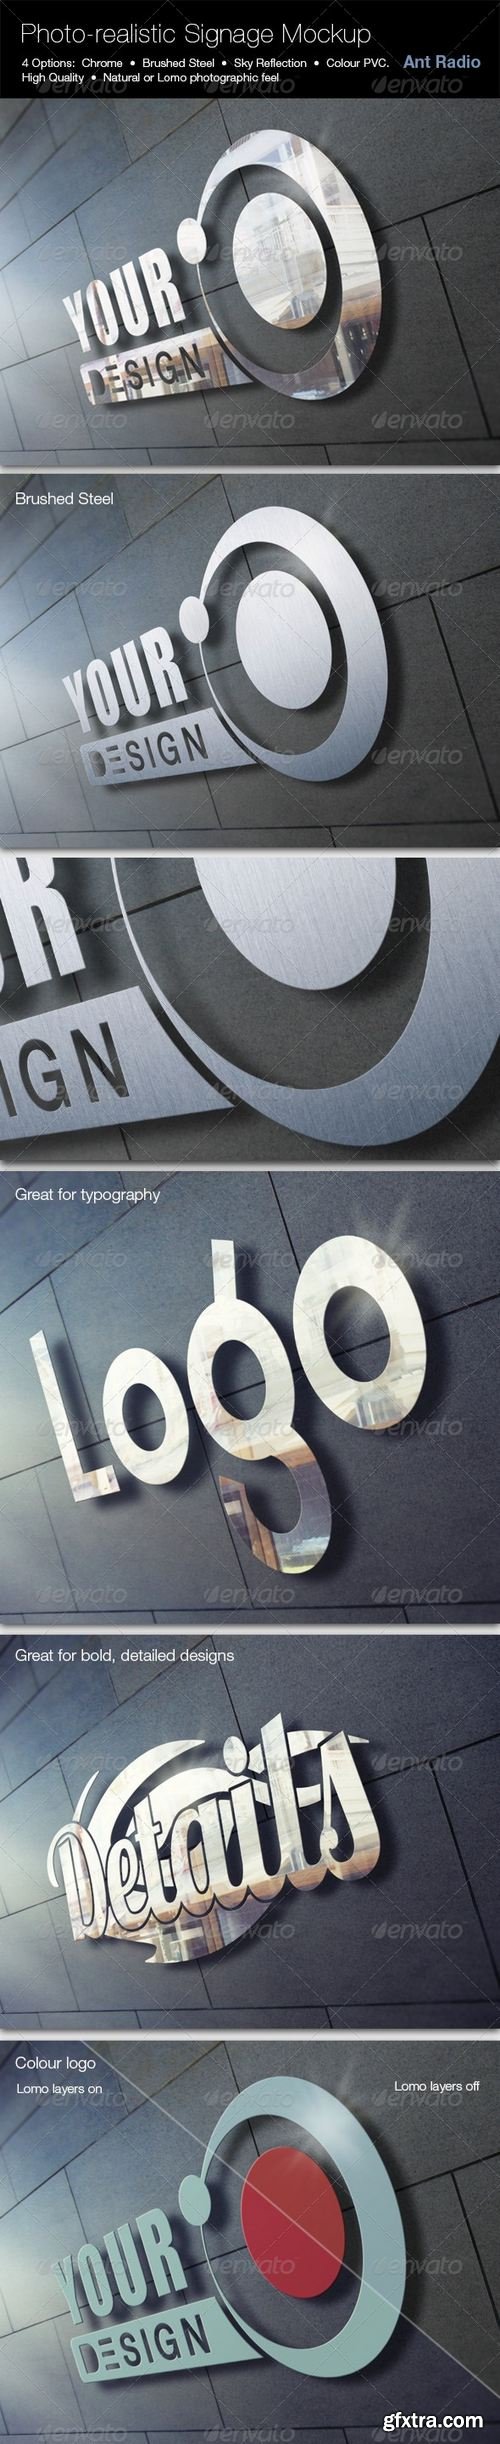 Photorealistic Metal Signage Mock-up - GraphicRiver 7783448